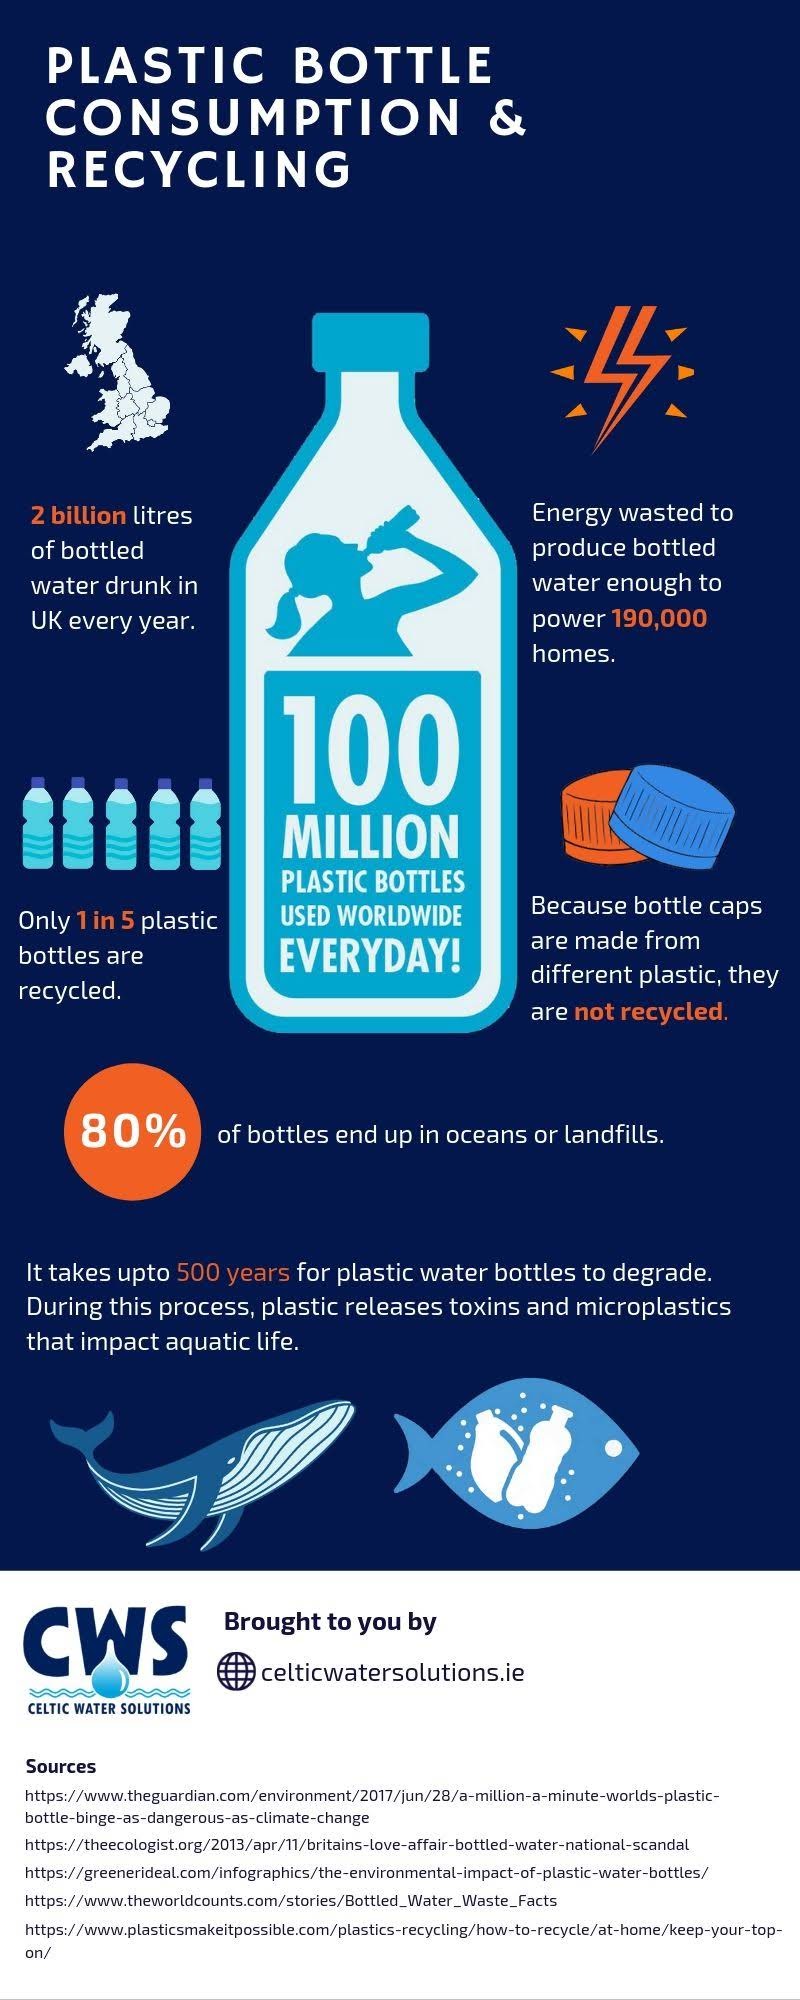 Some facts about recycling. #infographic | Recycling facts, Recycling information, Recycling lessons